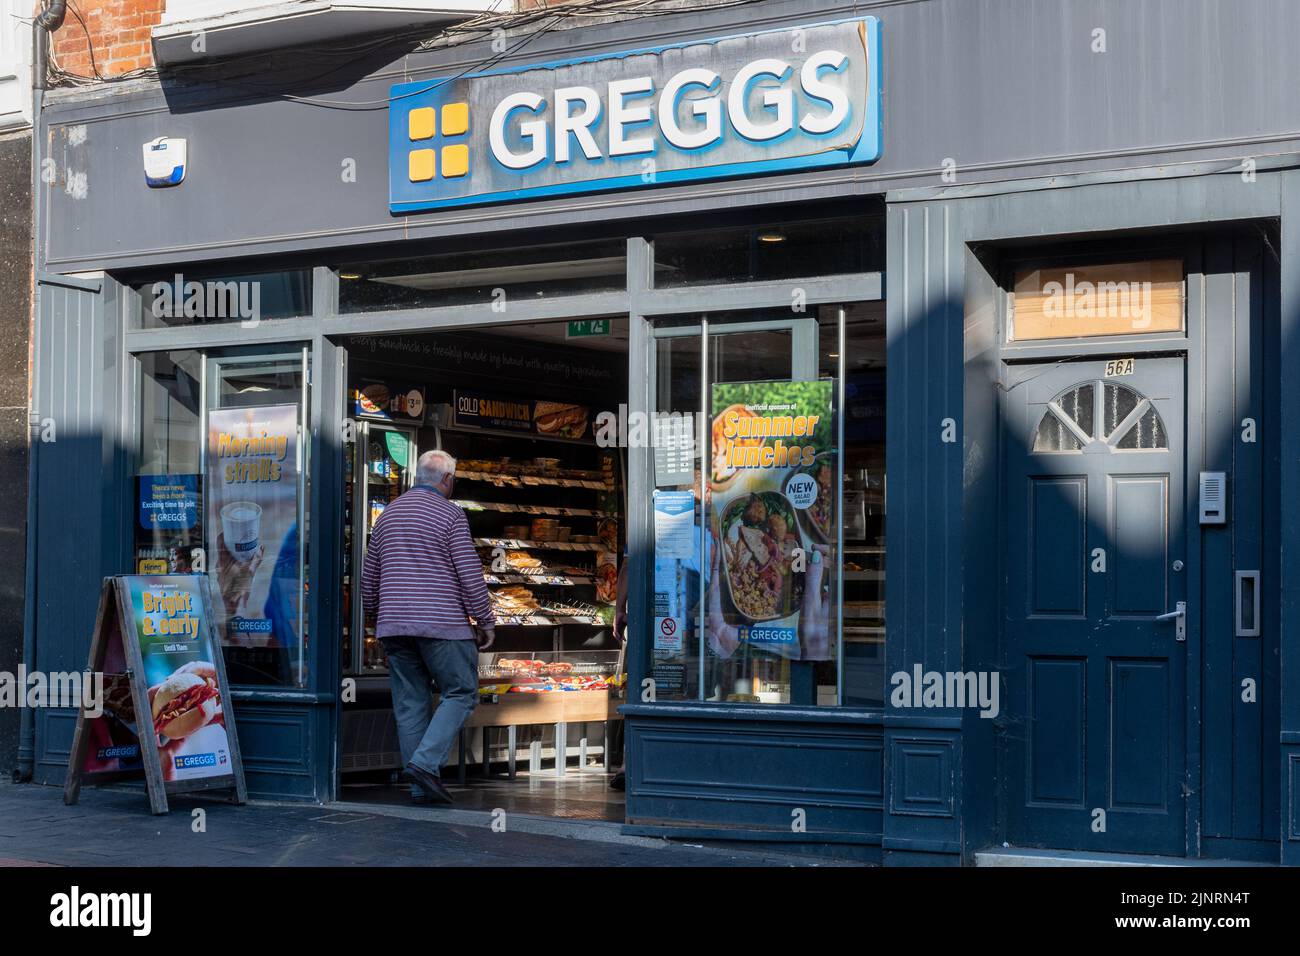 Greggs branch, a chain of bakeries, bakery shop selling sandwiches and pastries, England, UK Stock Photo